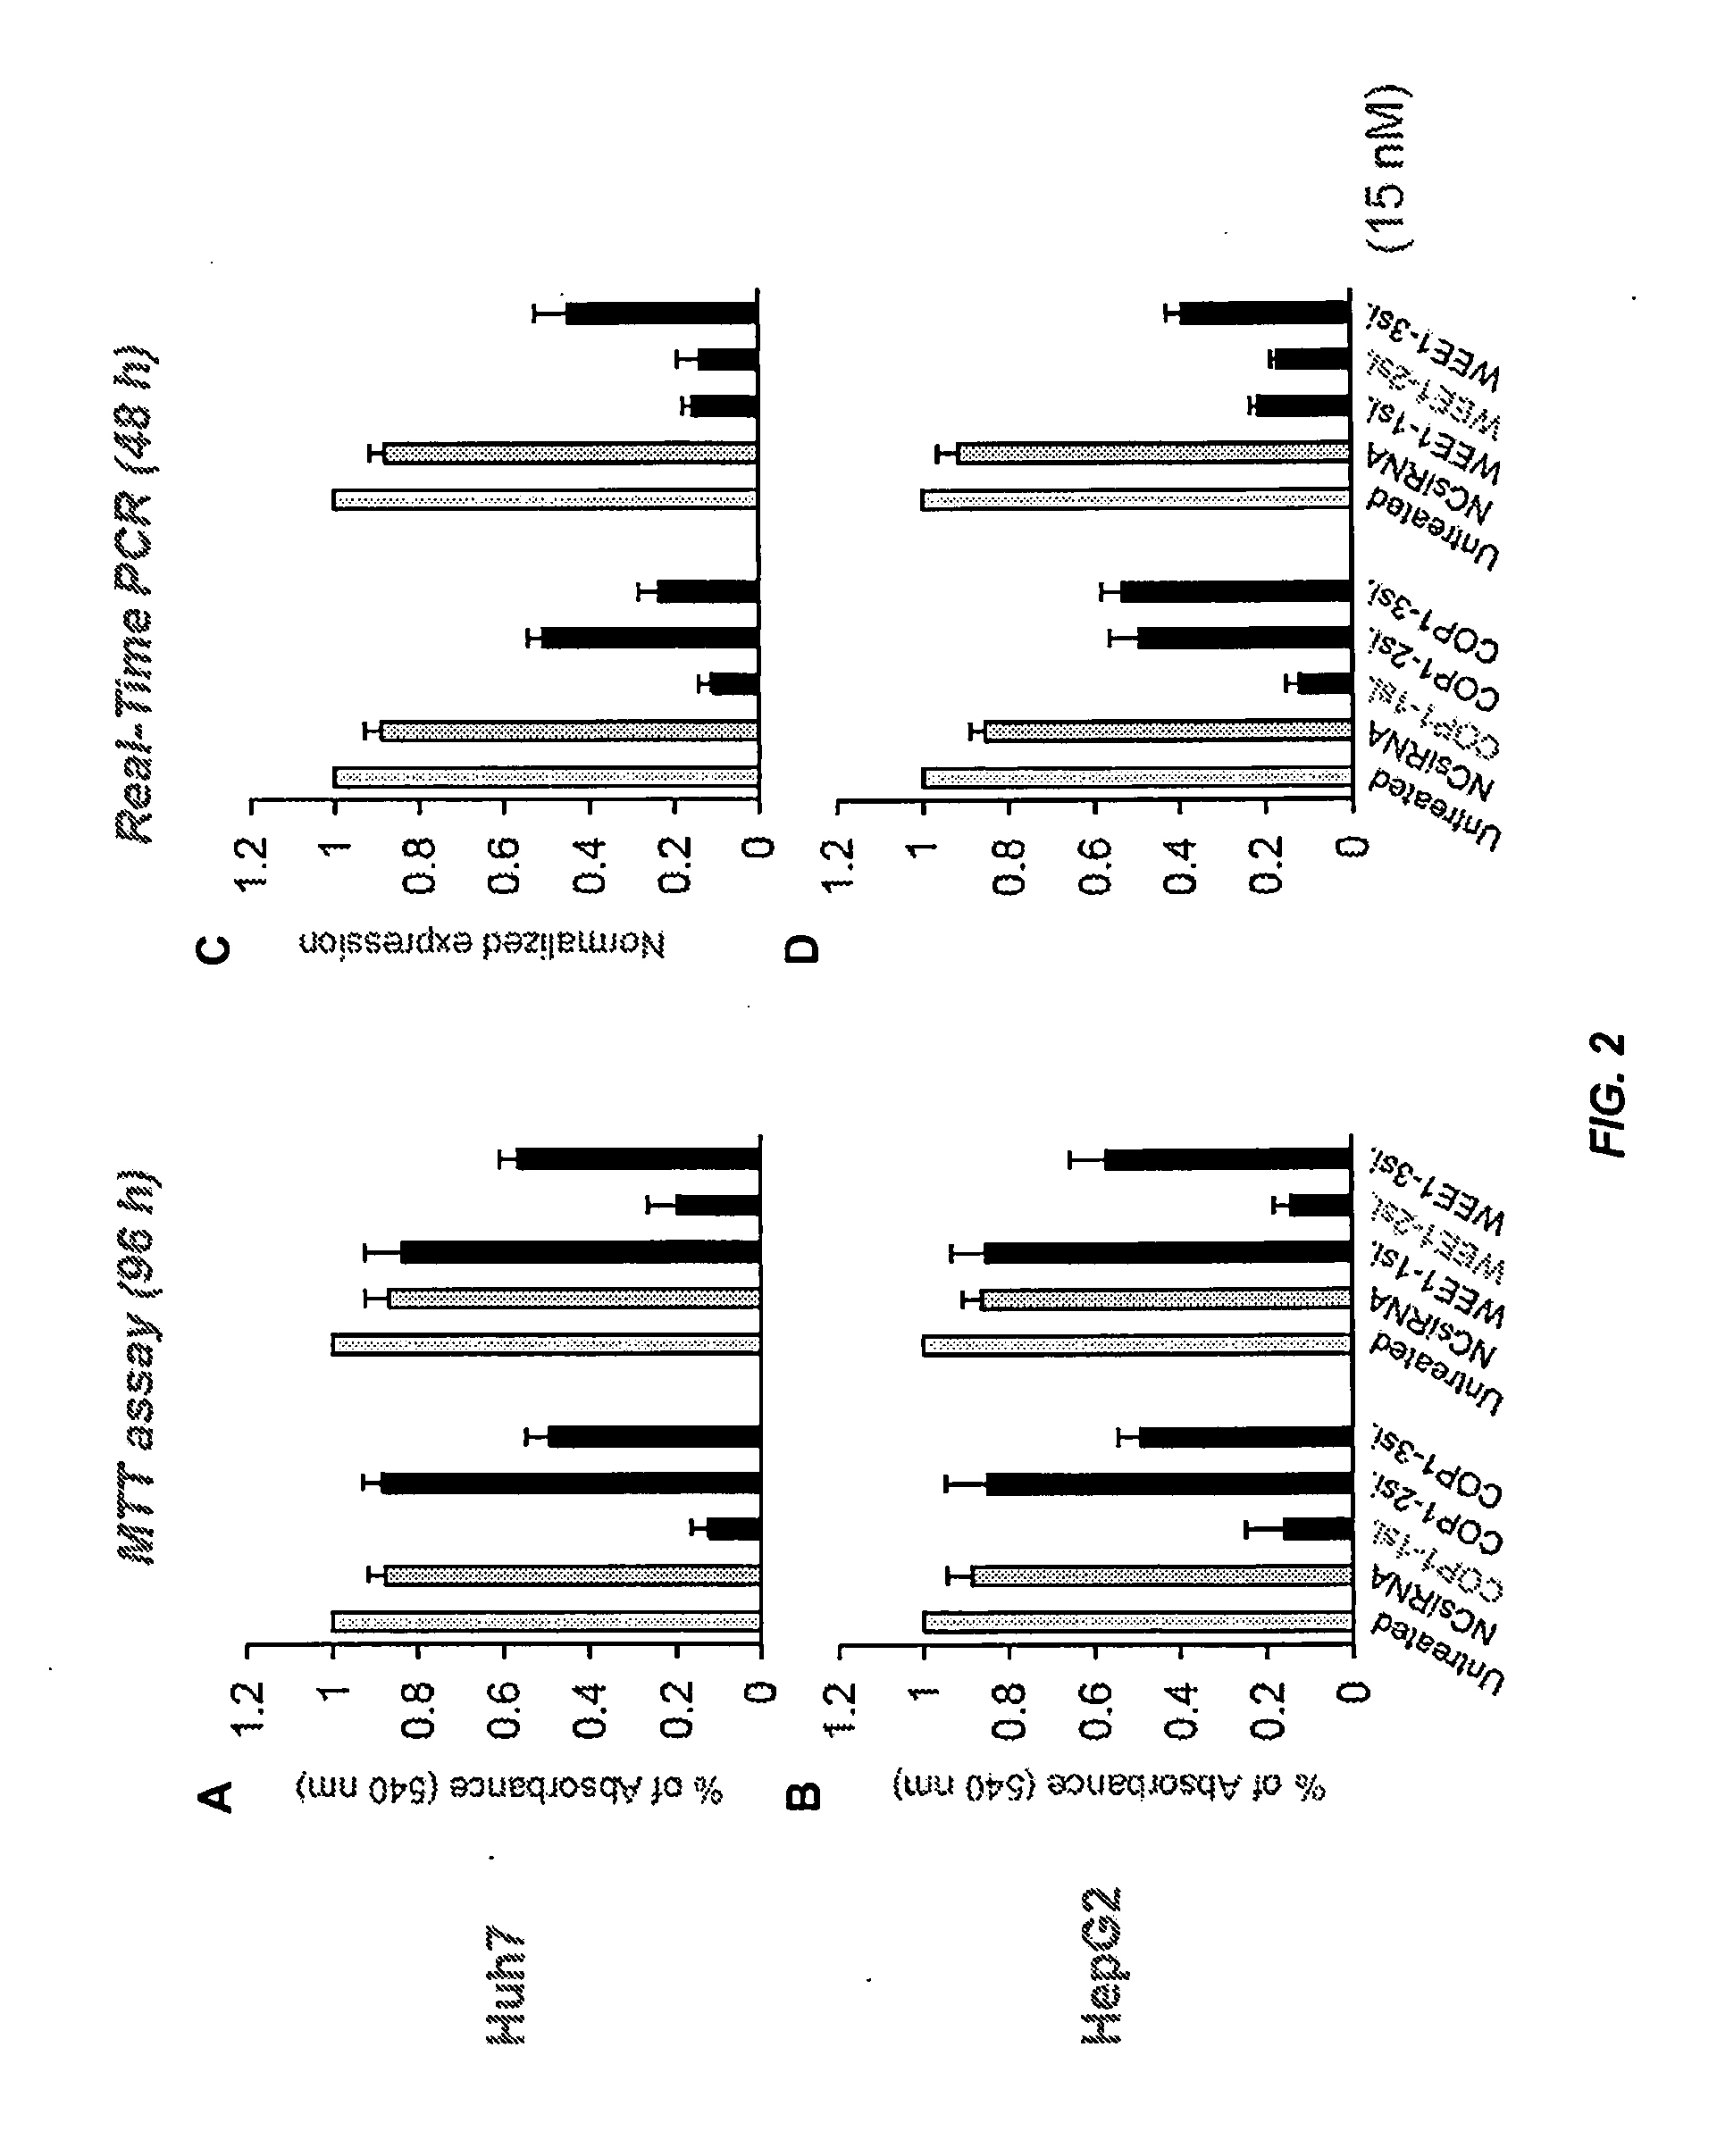 Compositions and methods for silencing genes expressed in cancer